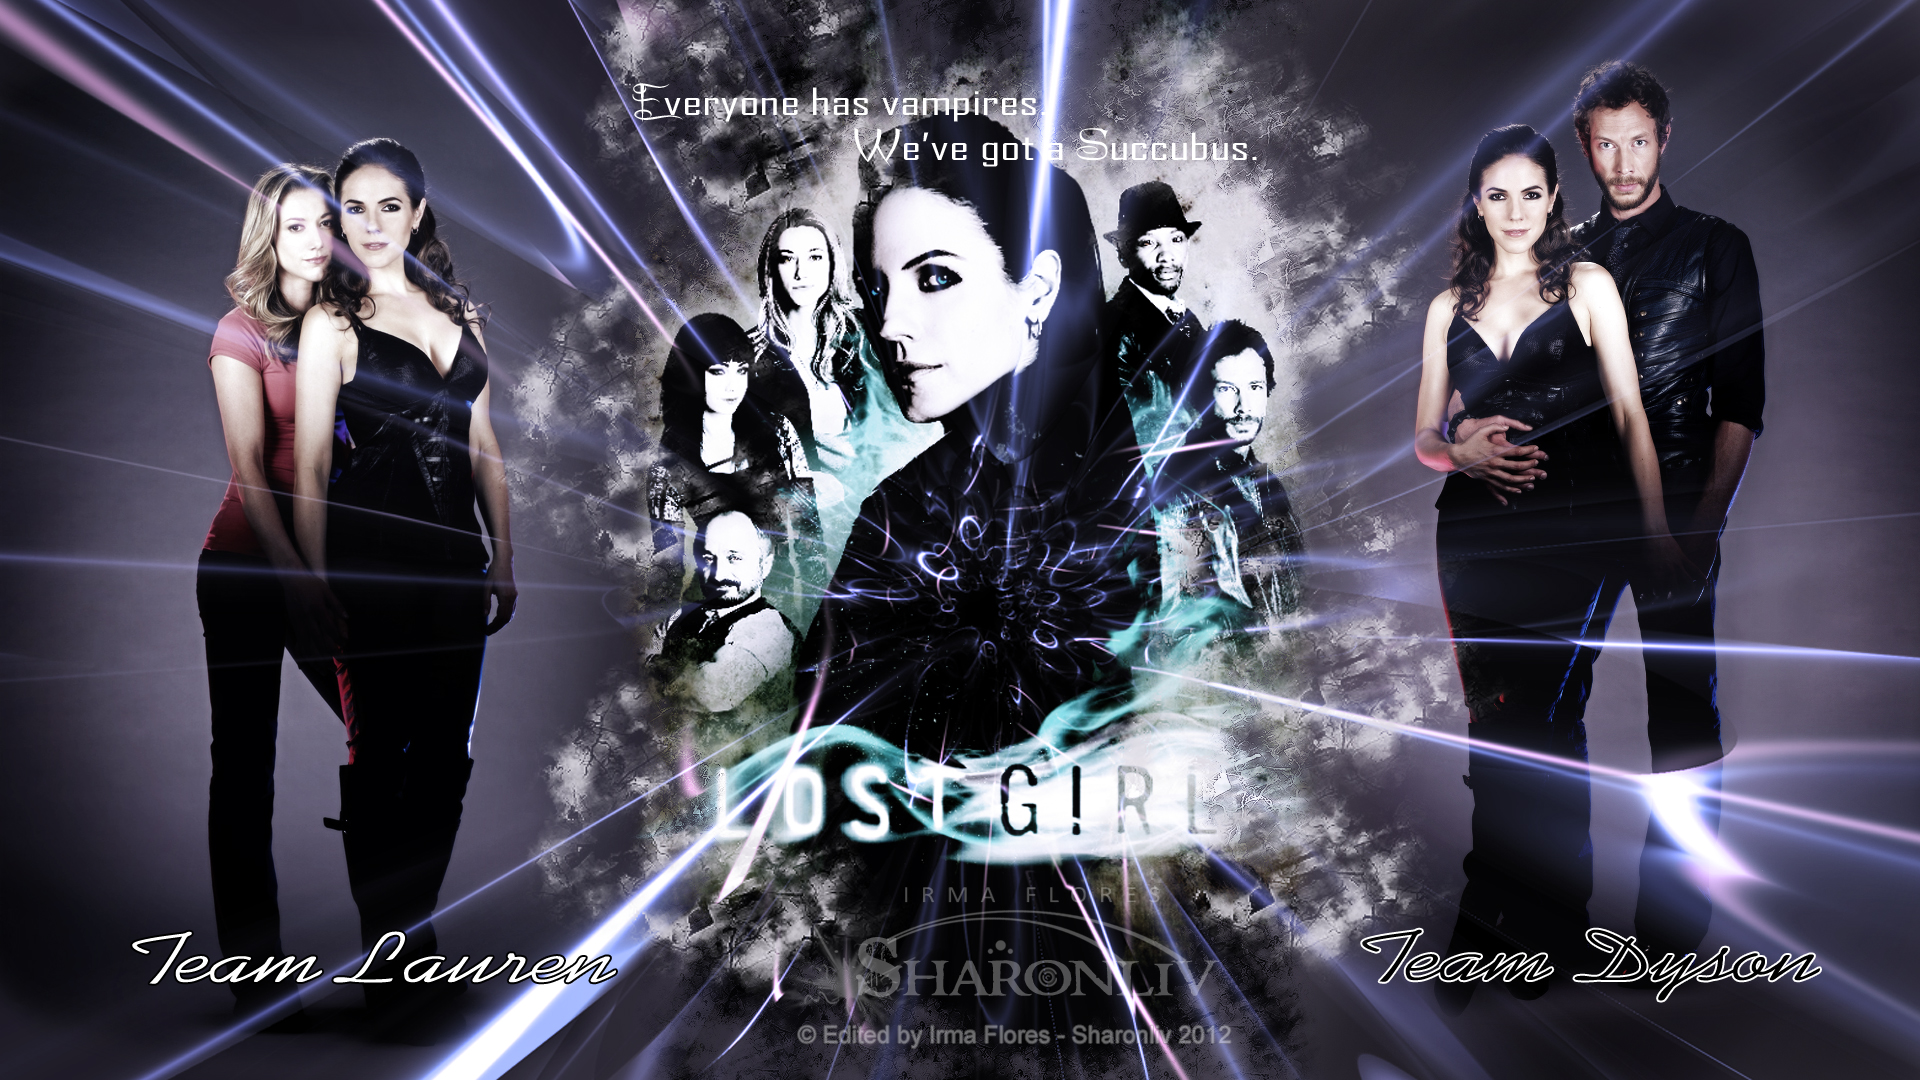 TV Show Lost Girl HD Wallpaper | Background Image